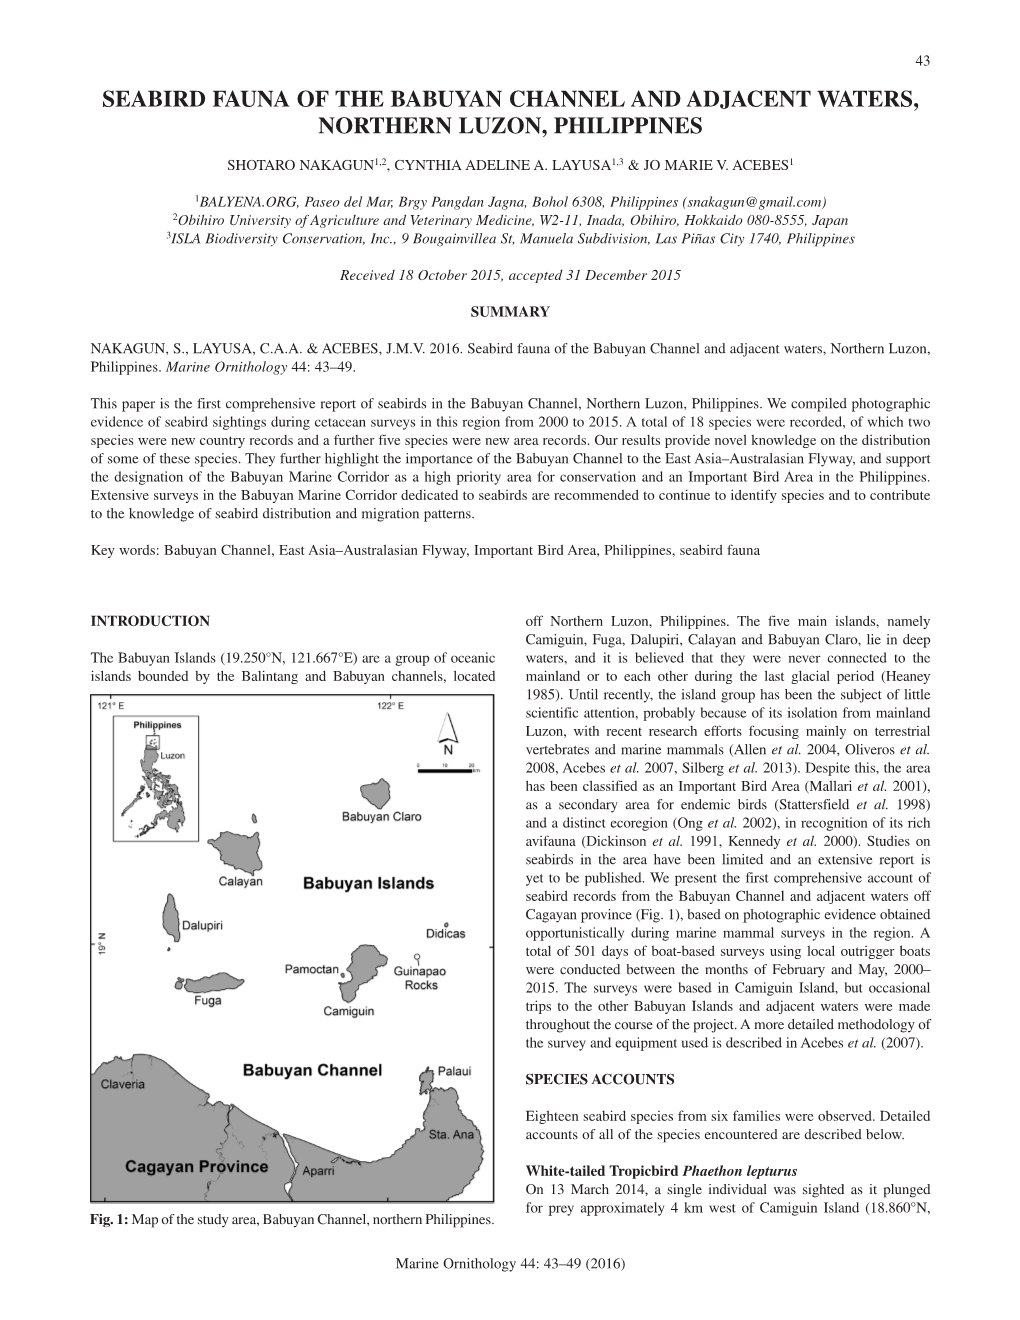 Seabird Fauna of the Babuyan Channel and Adjacent Waters, Northern Luzon, Philippines